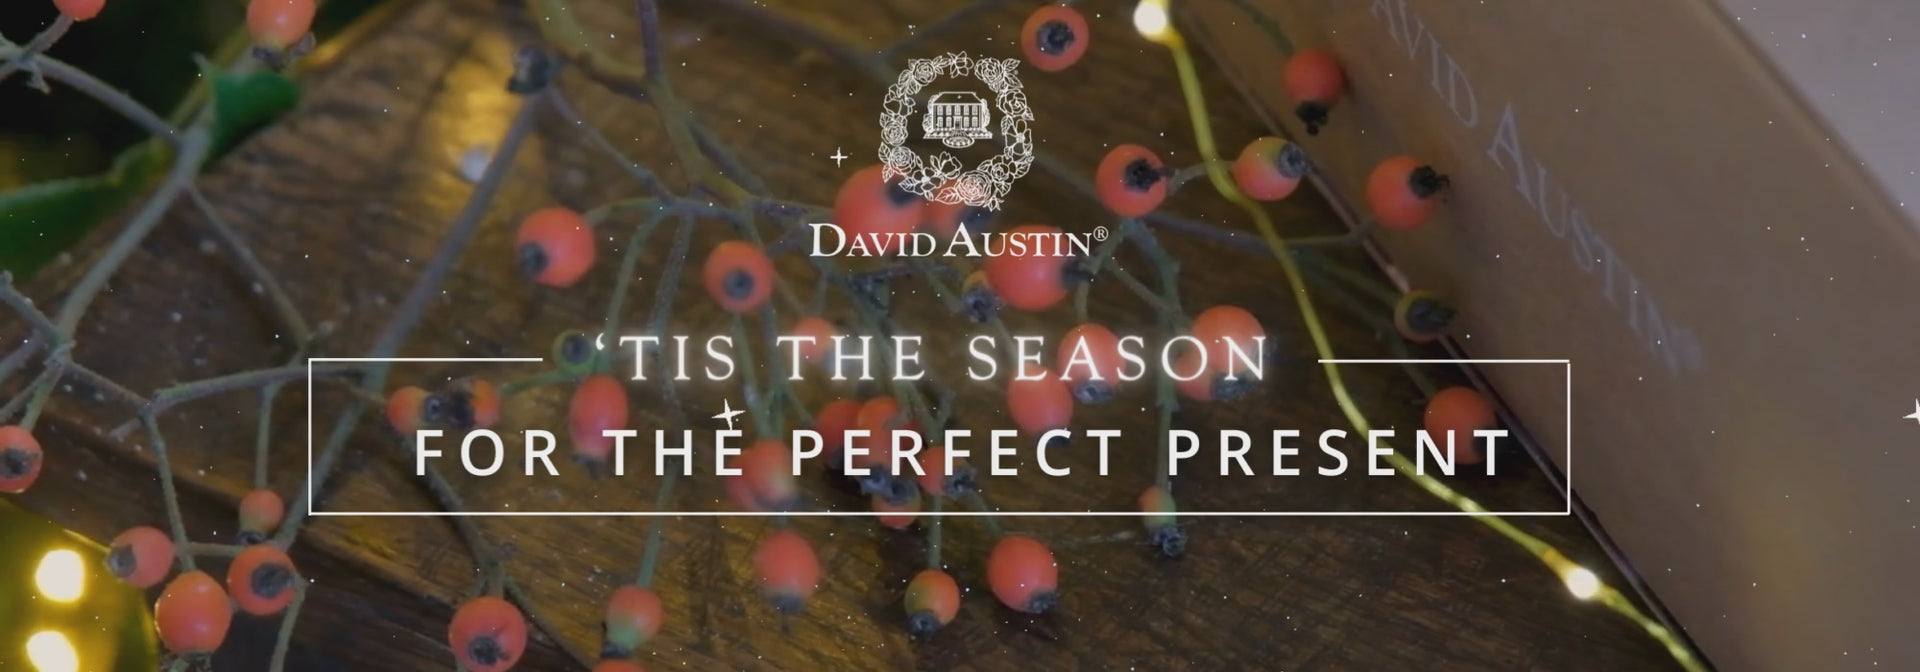 'tis the season for the perfect present - a video showing our calendar and gift cards surrounded by rose hips